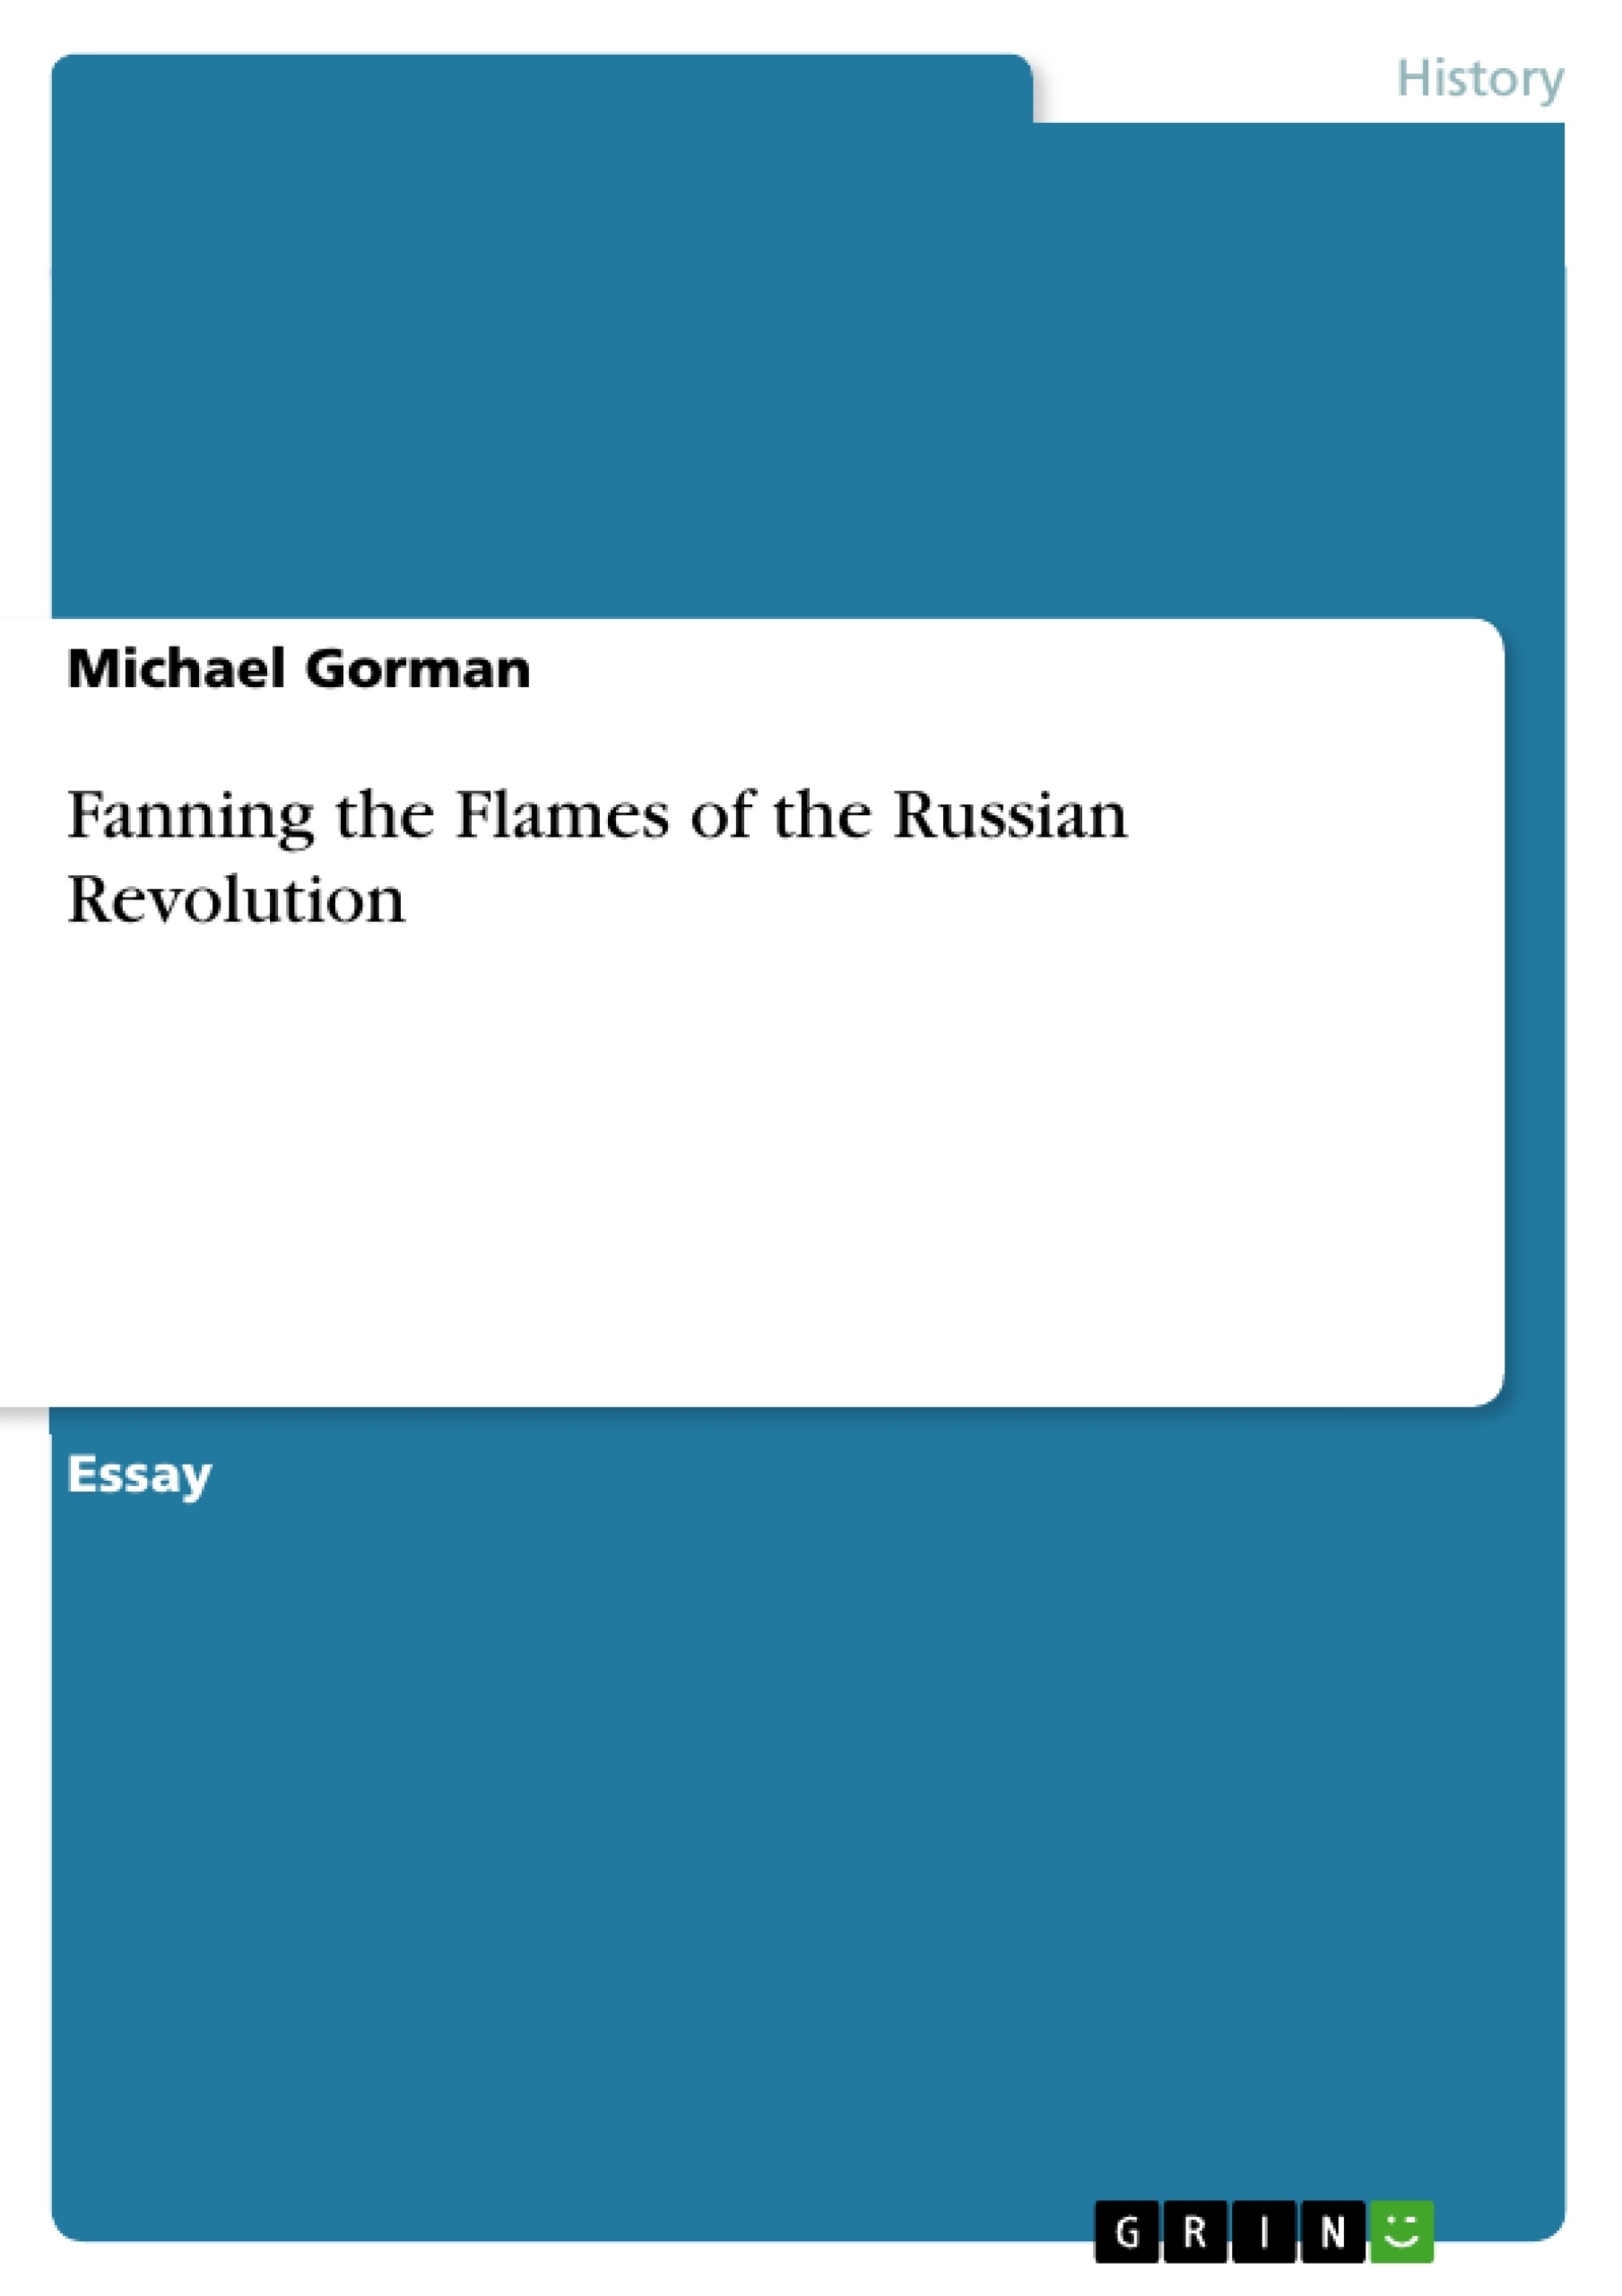 Titel: Fanning the Flames of the Russian Revolution